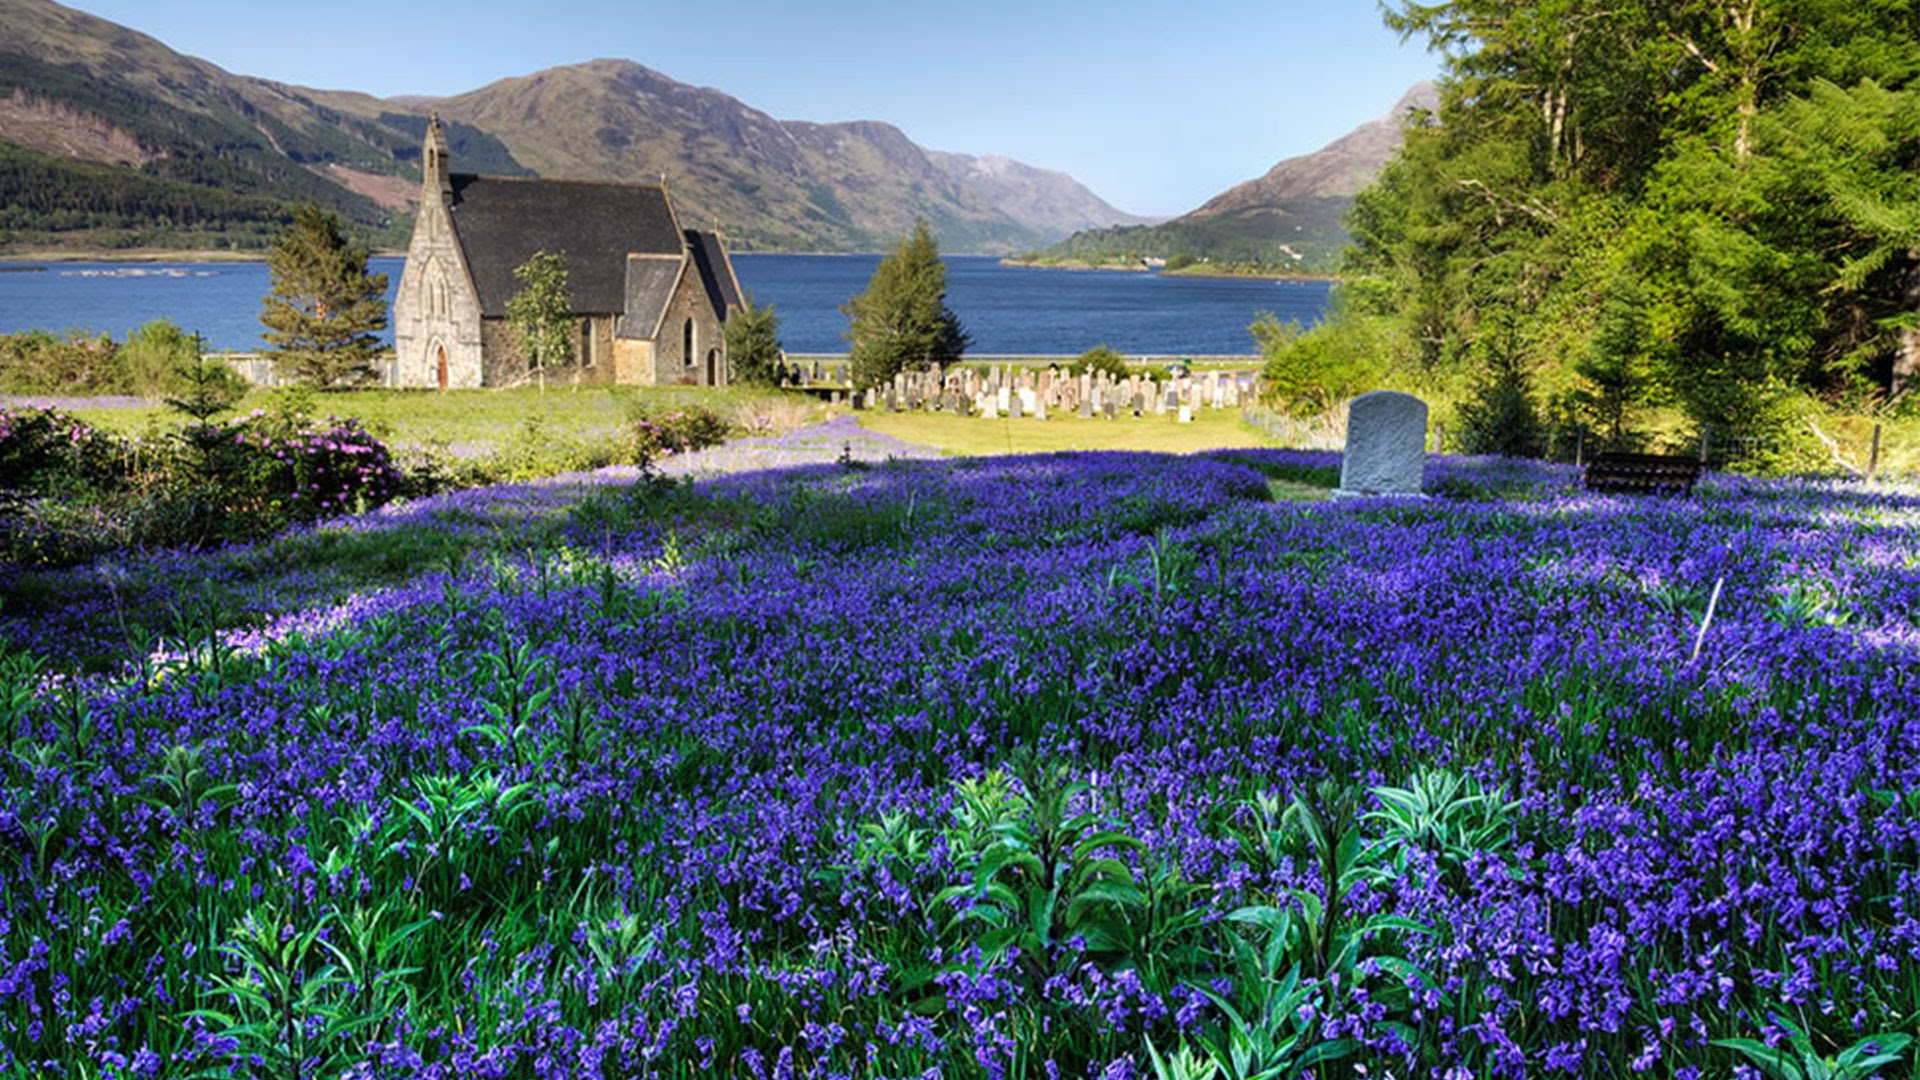 The Blue Bells of Scotland' - Performed on the guitar by Ulrich ...